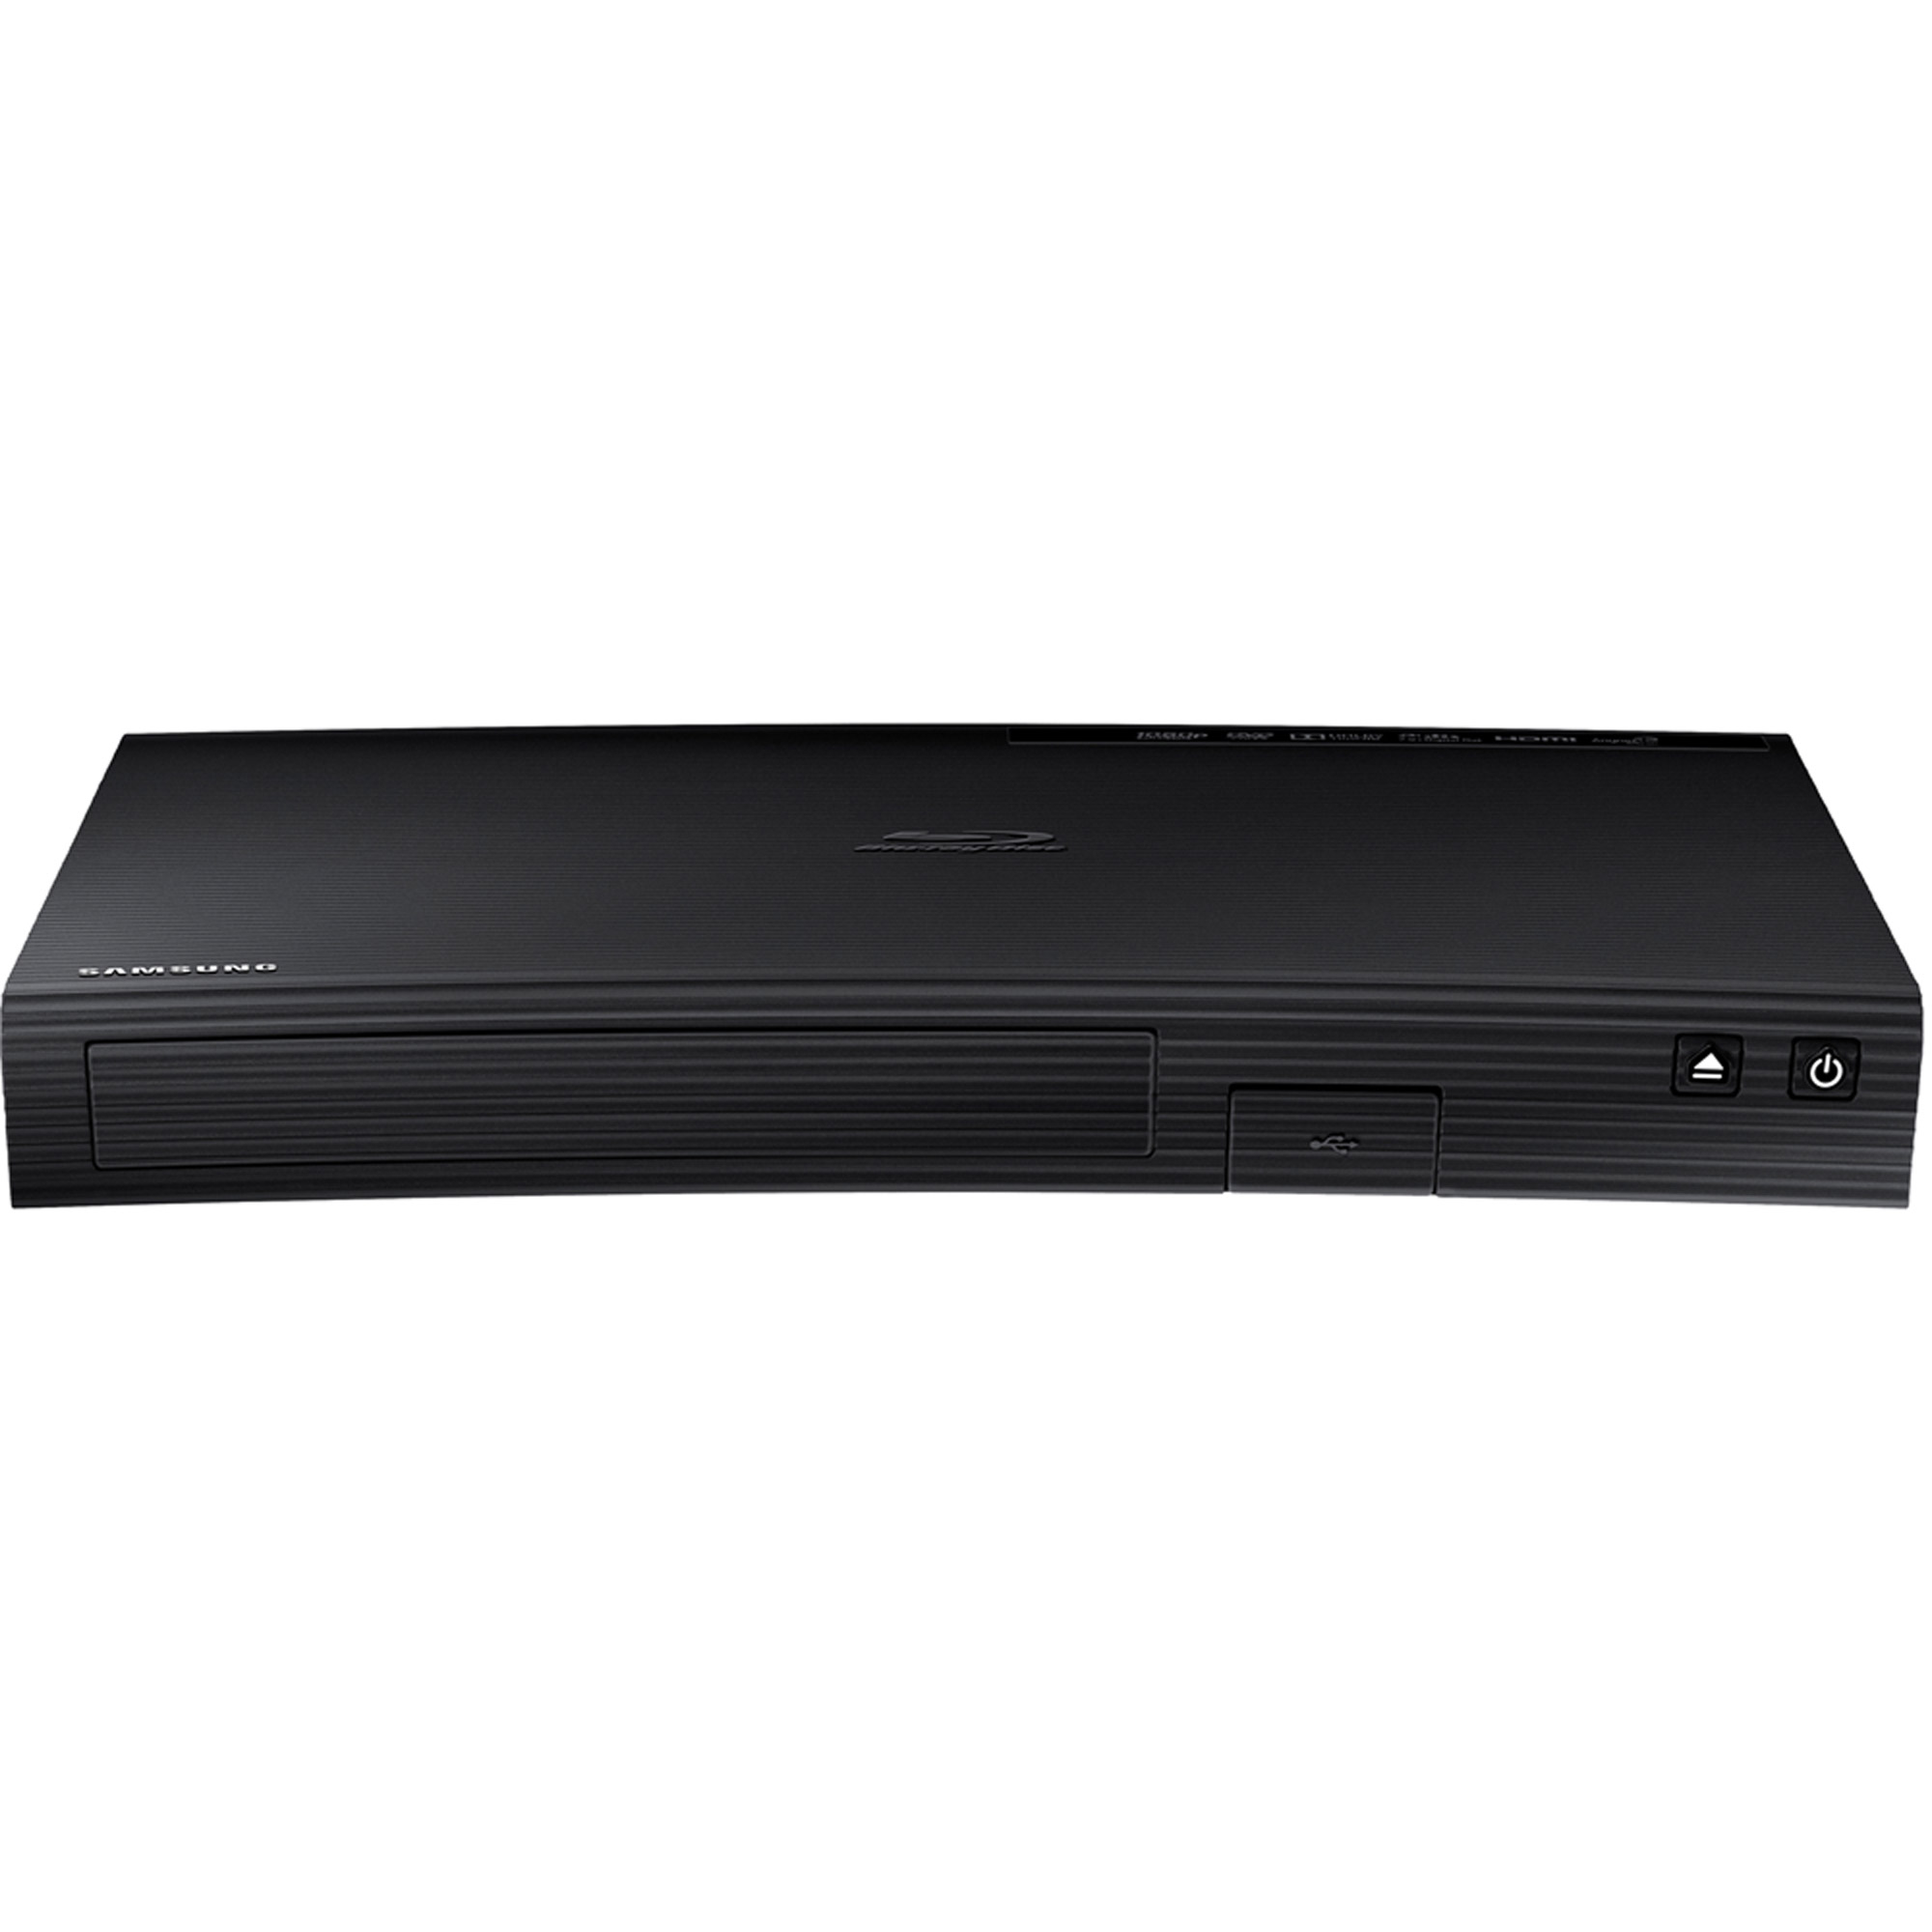 SAMSUNG Blu-Ray & DVD Player with Streaming - BD-JM51 - image 1 of 4